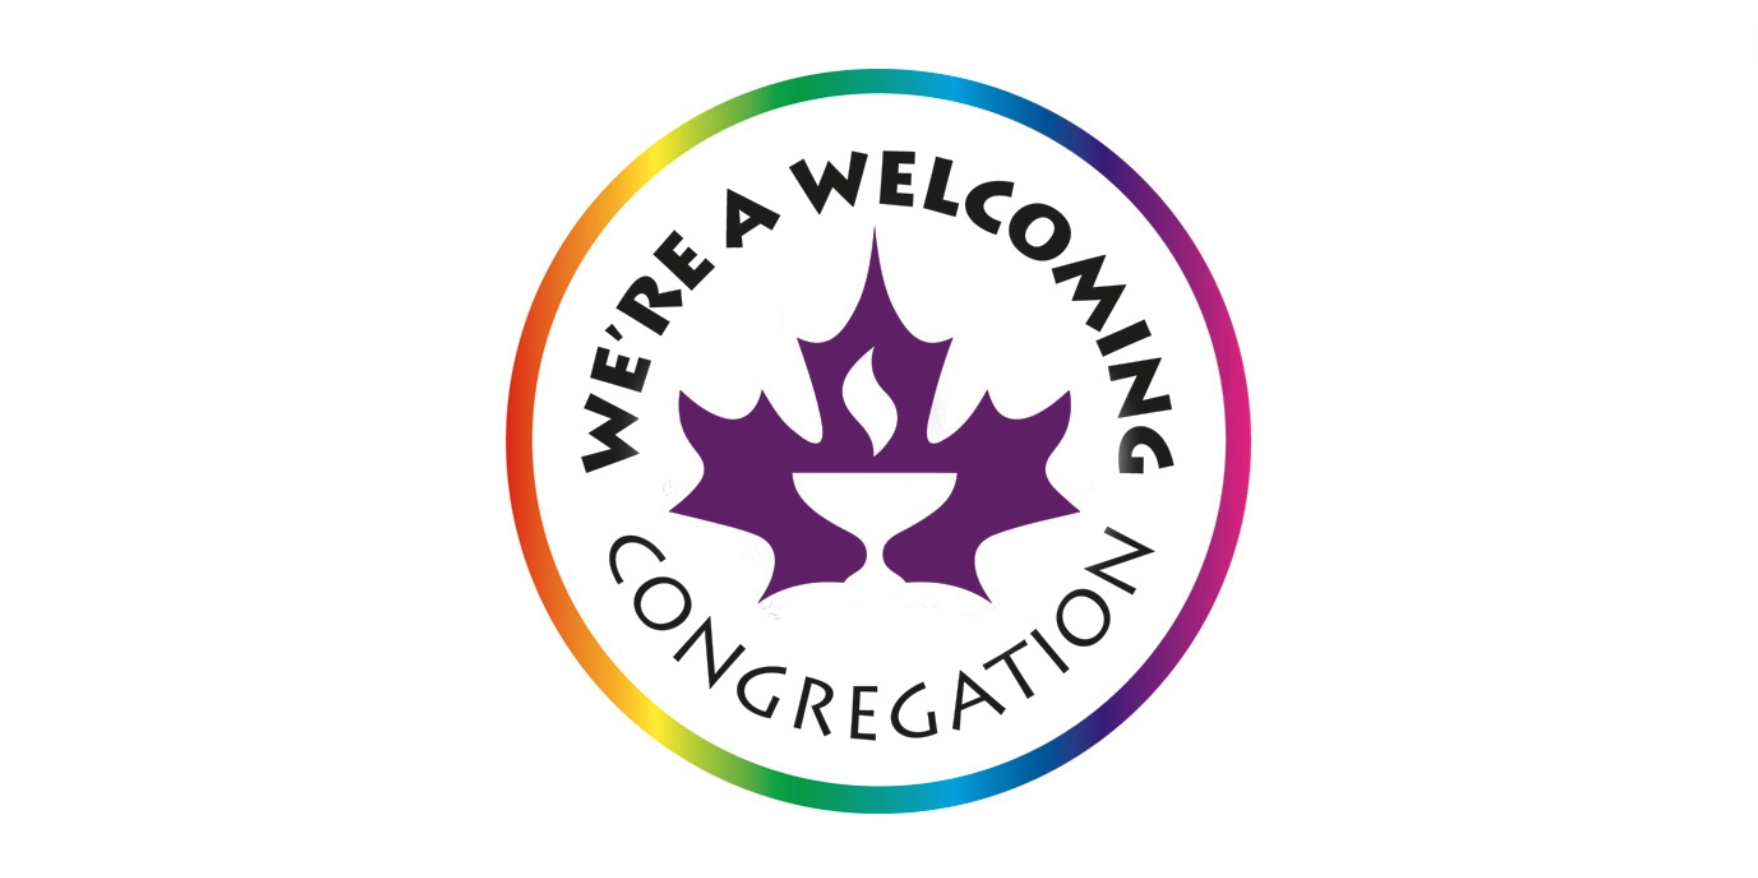 We're a welcoming congregation logo